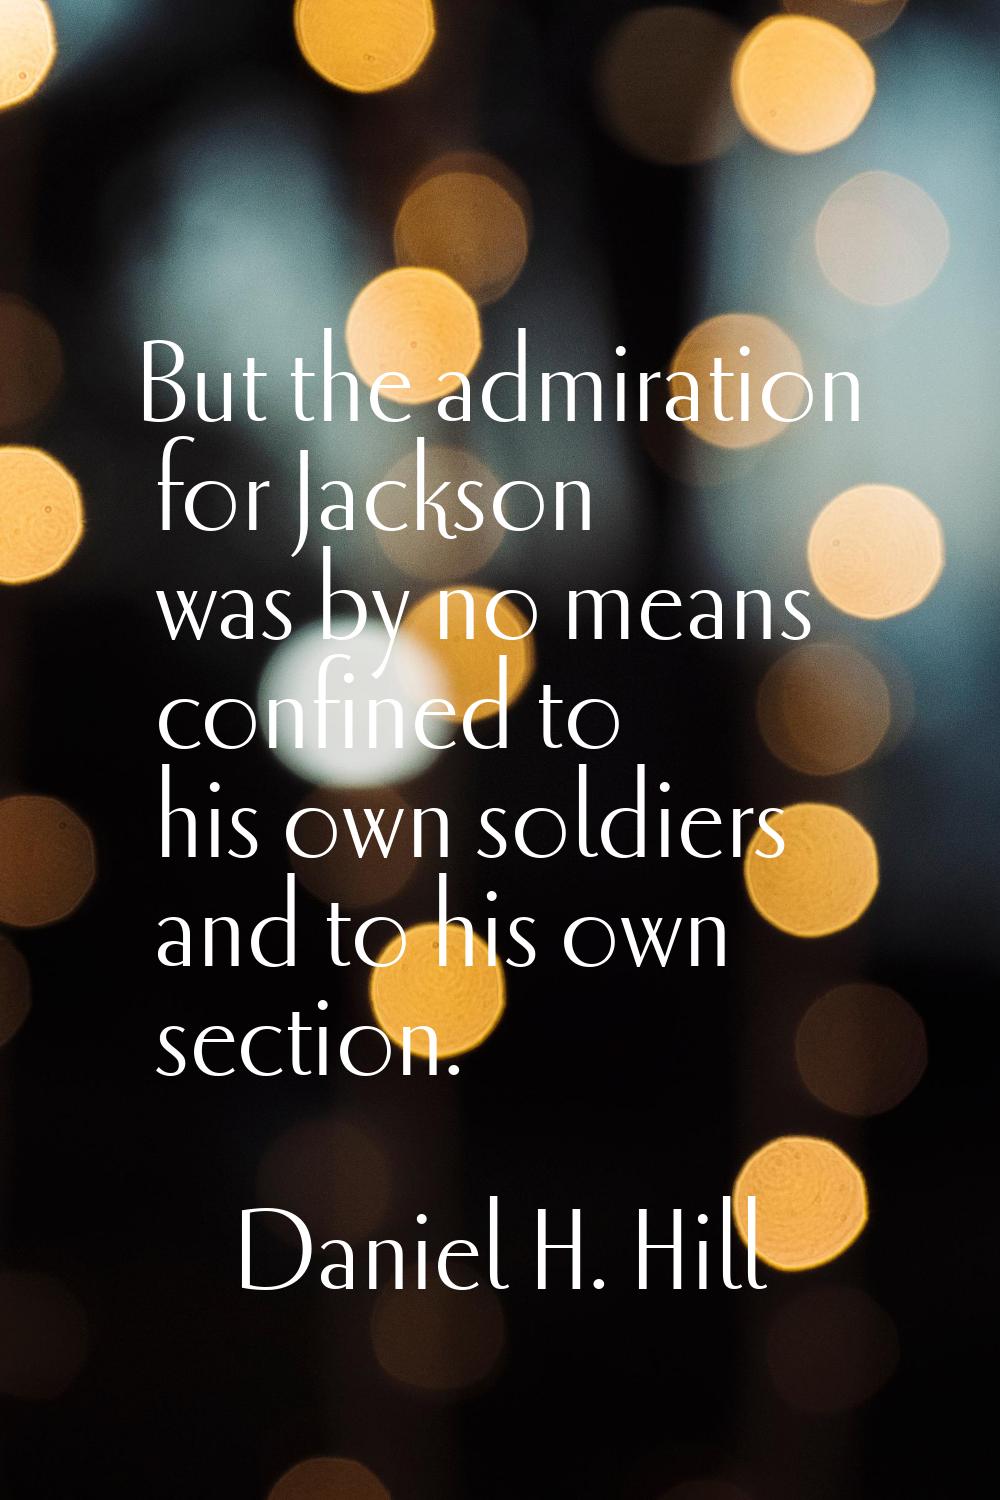 But the admiration for Jackson was by no means confined to his own soldiers and to his own section.